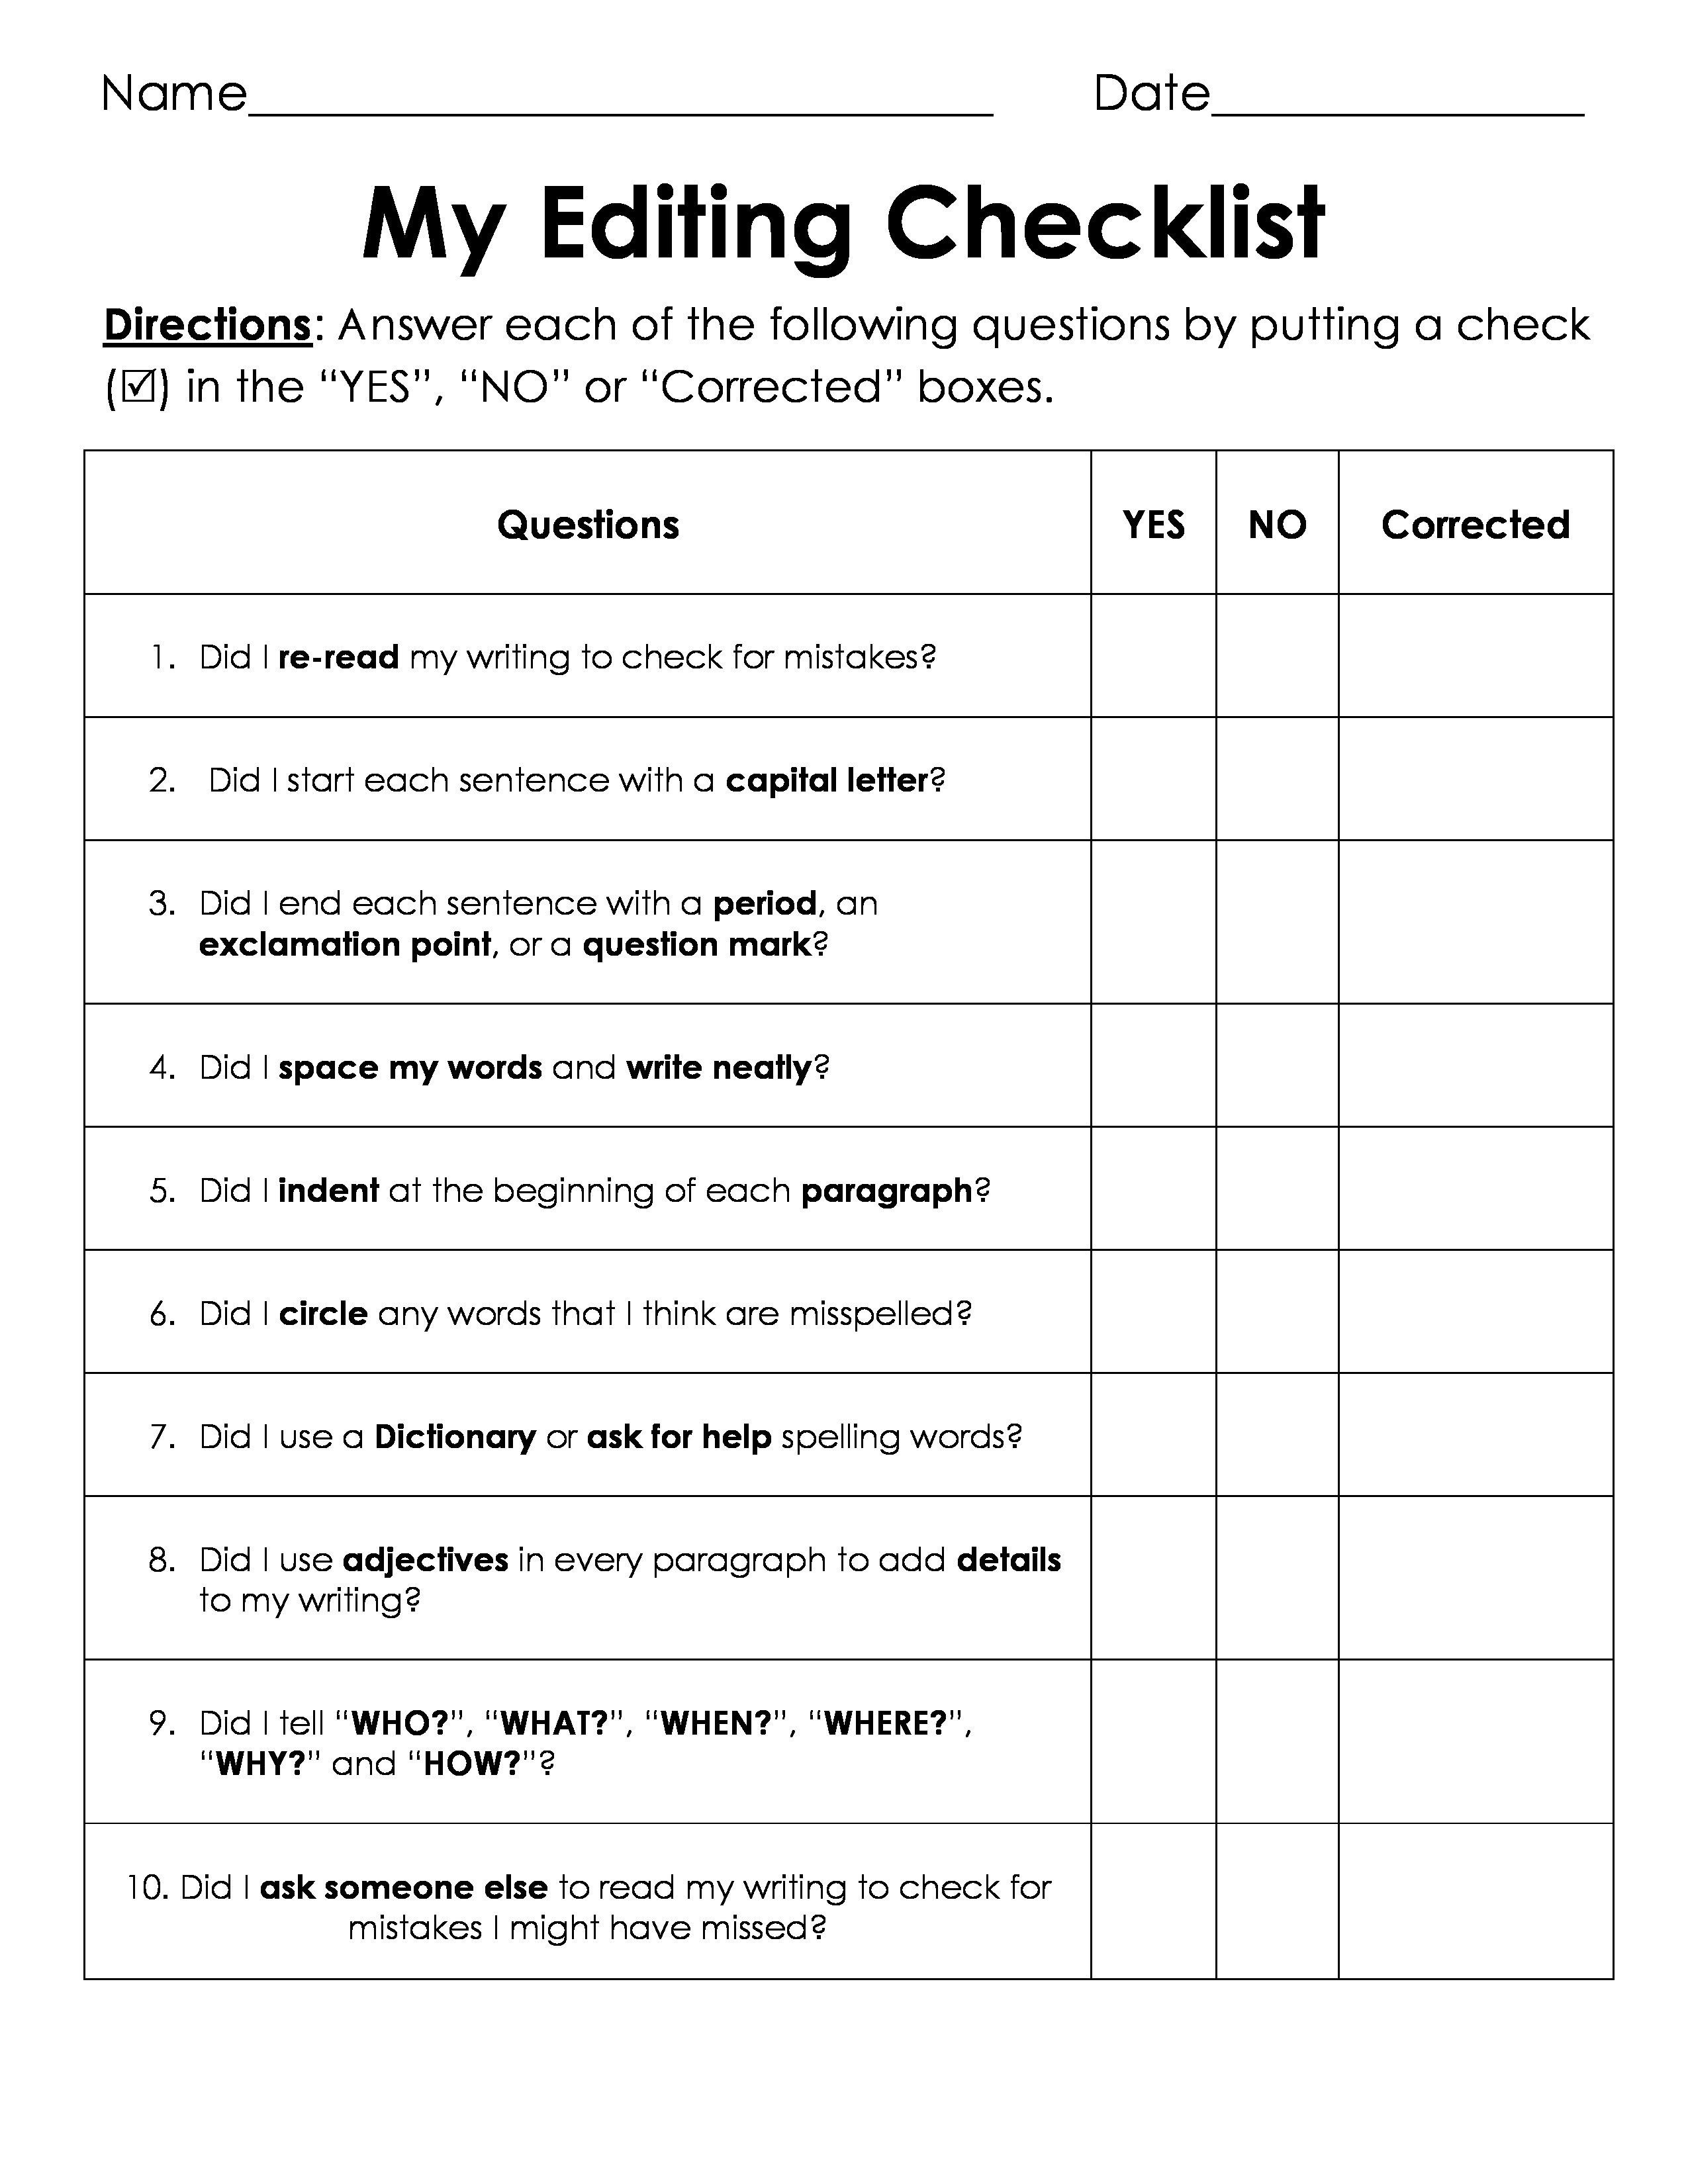 Third Grade Editing Worksheets Free My Editing Checklist 1 Sheet I Used This with My 3rd